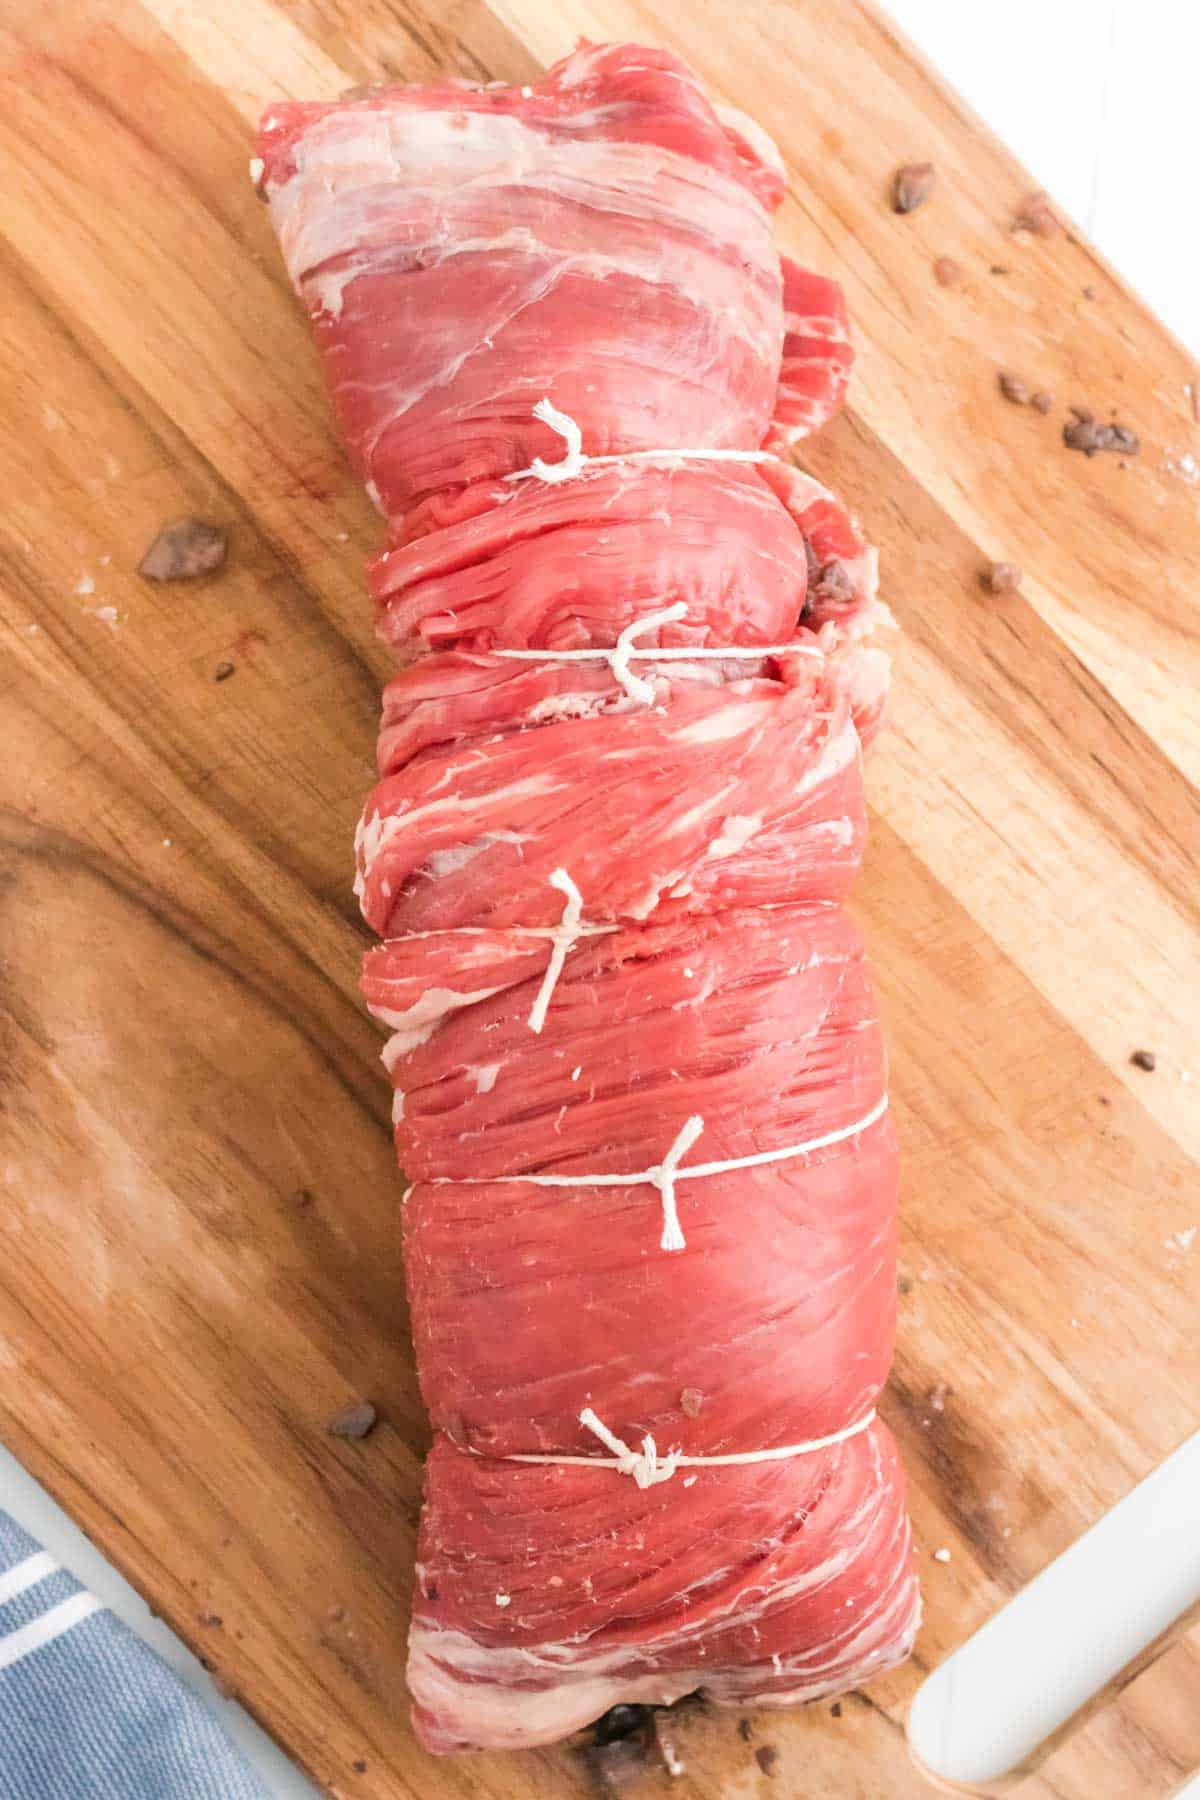 Rolled up flank steak stuffed with mushrooms, tied with twine.